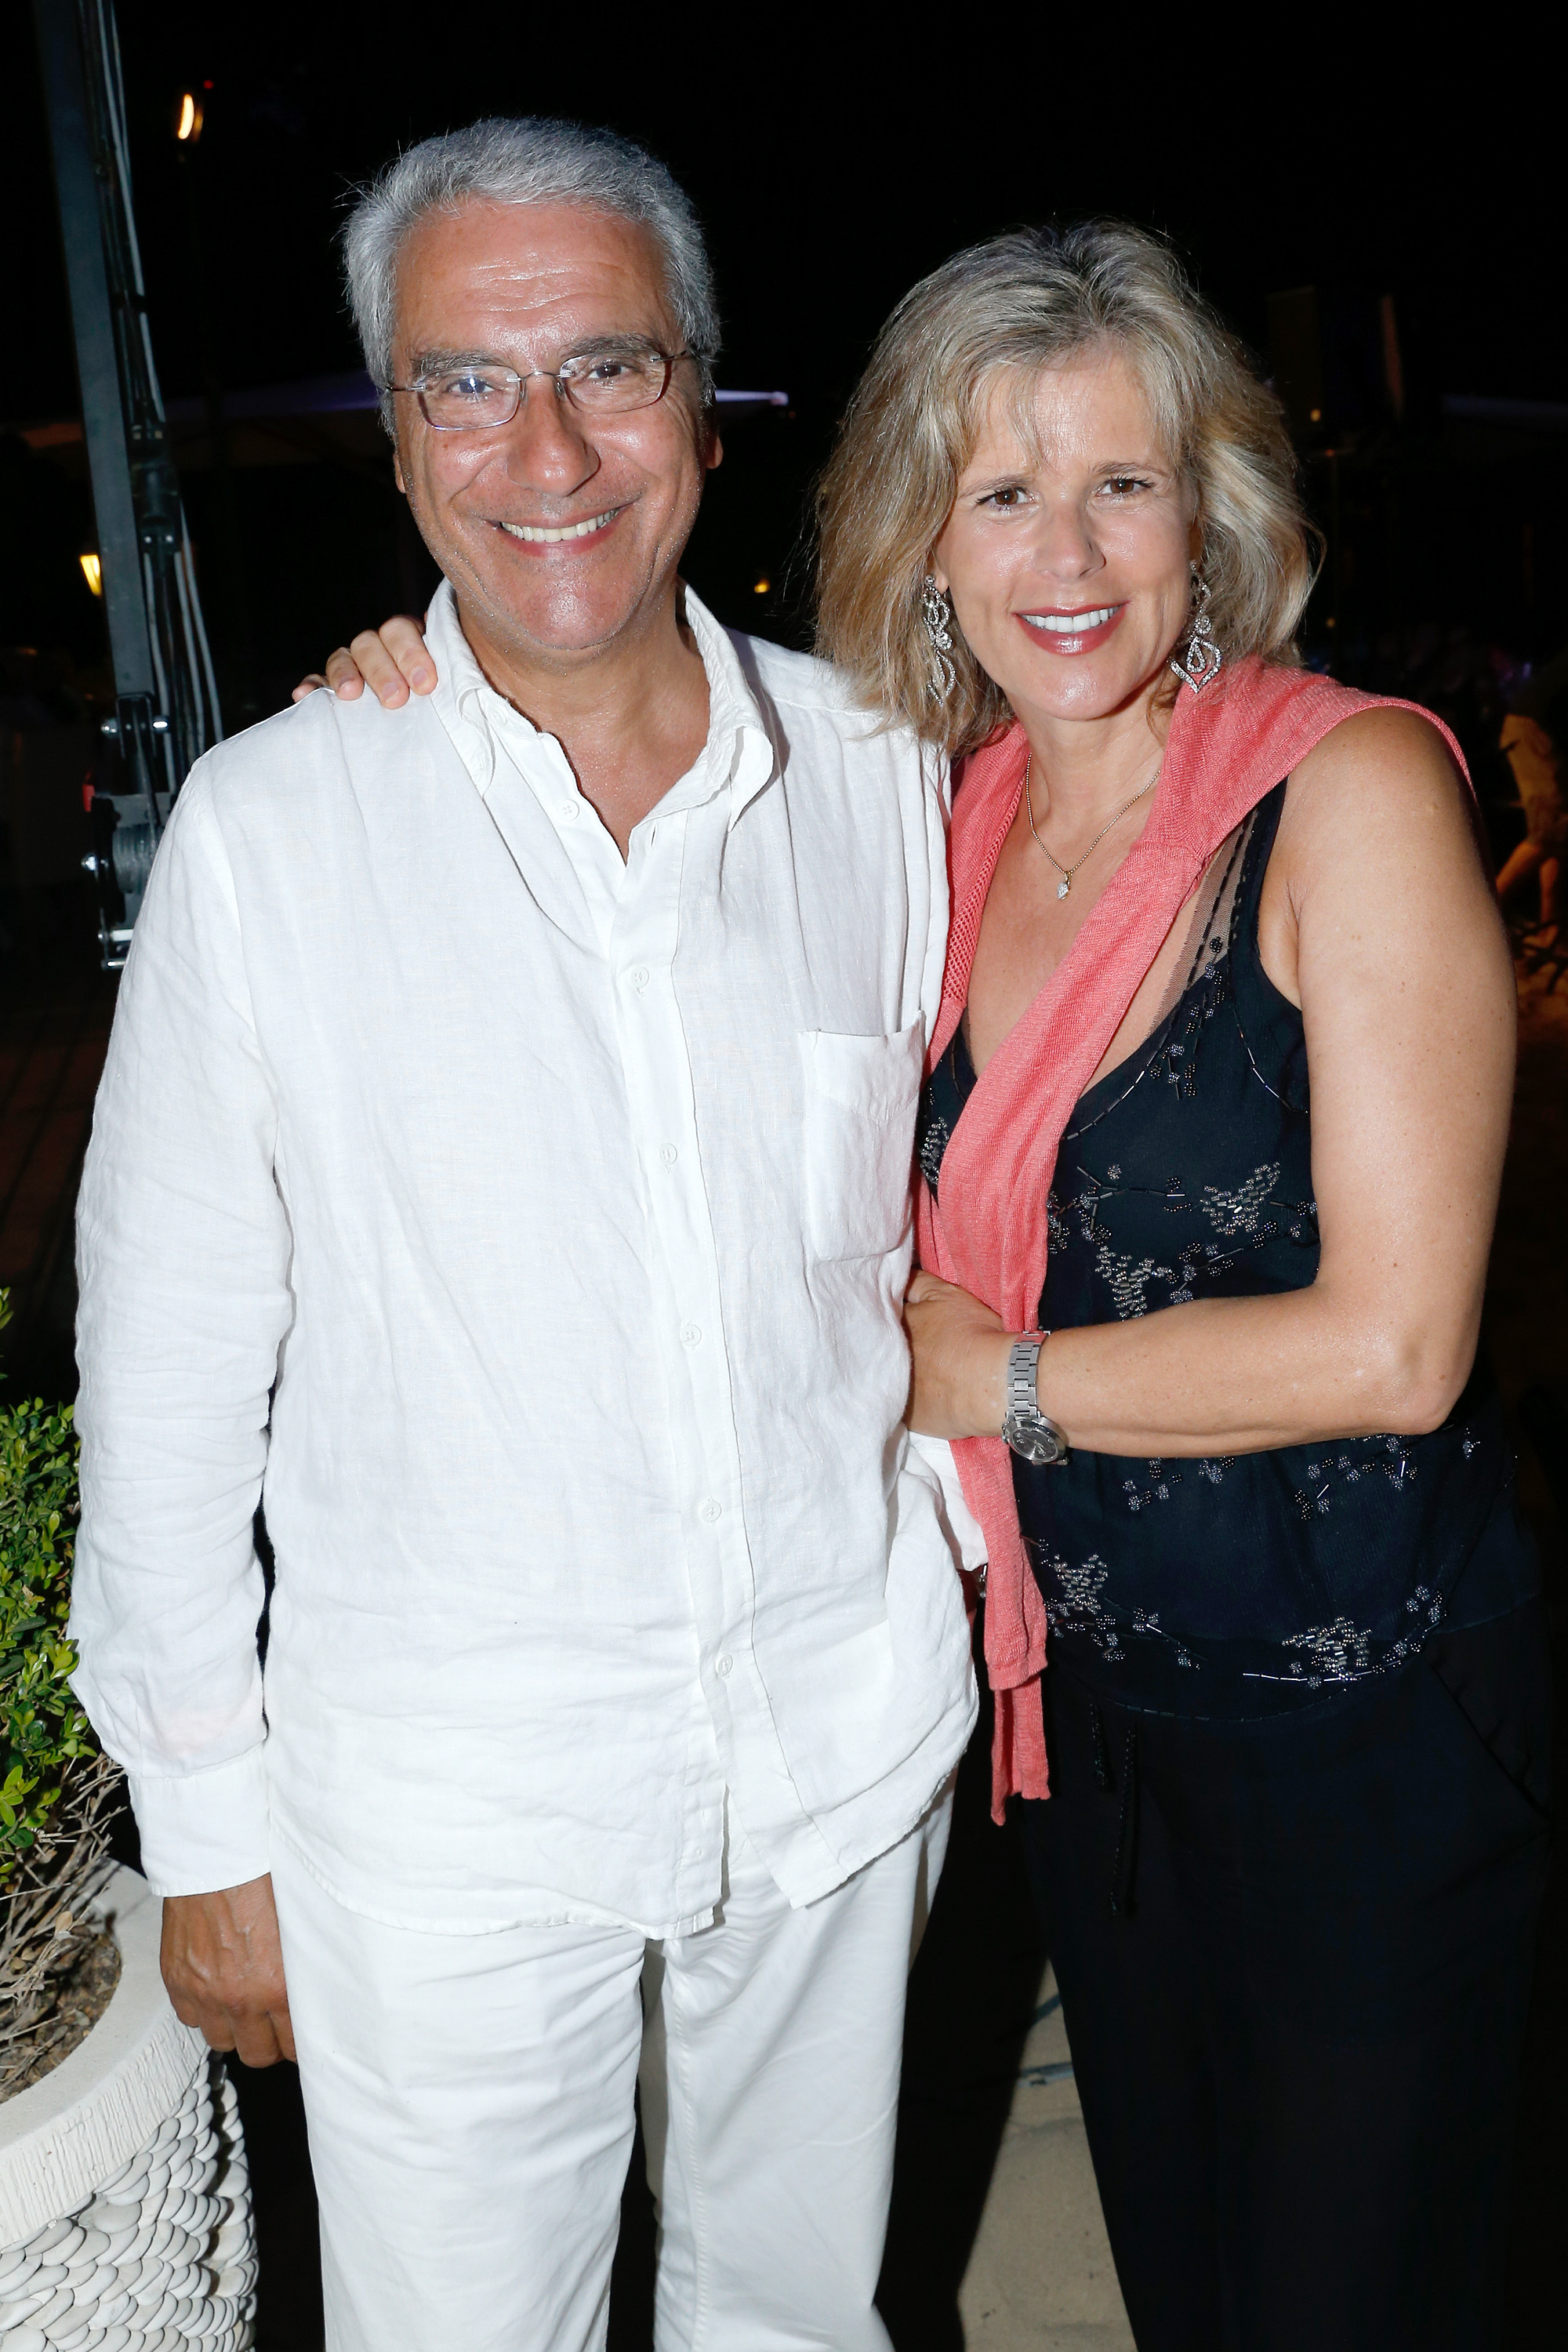 Norbert Balit and his companion Laurence Piquet at President of the Union of Showmen Marcel Campion's party at La Bouillabaisse beach on August 6, 2013 in Saint-Tropez, France | Source: Getty Images